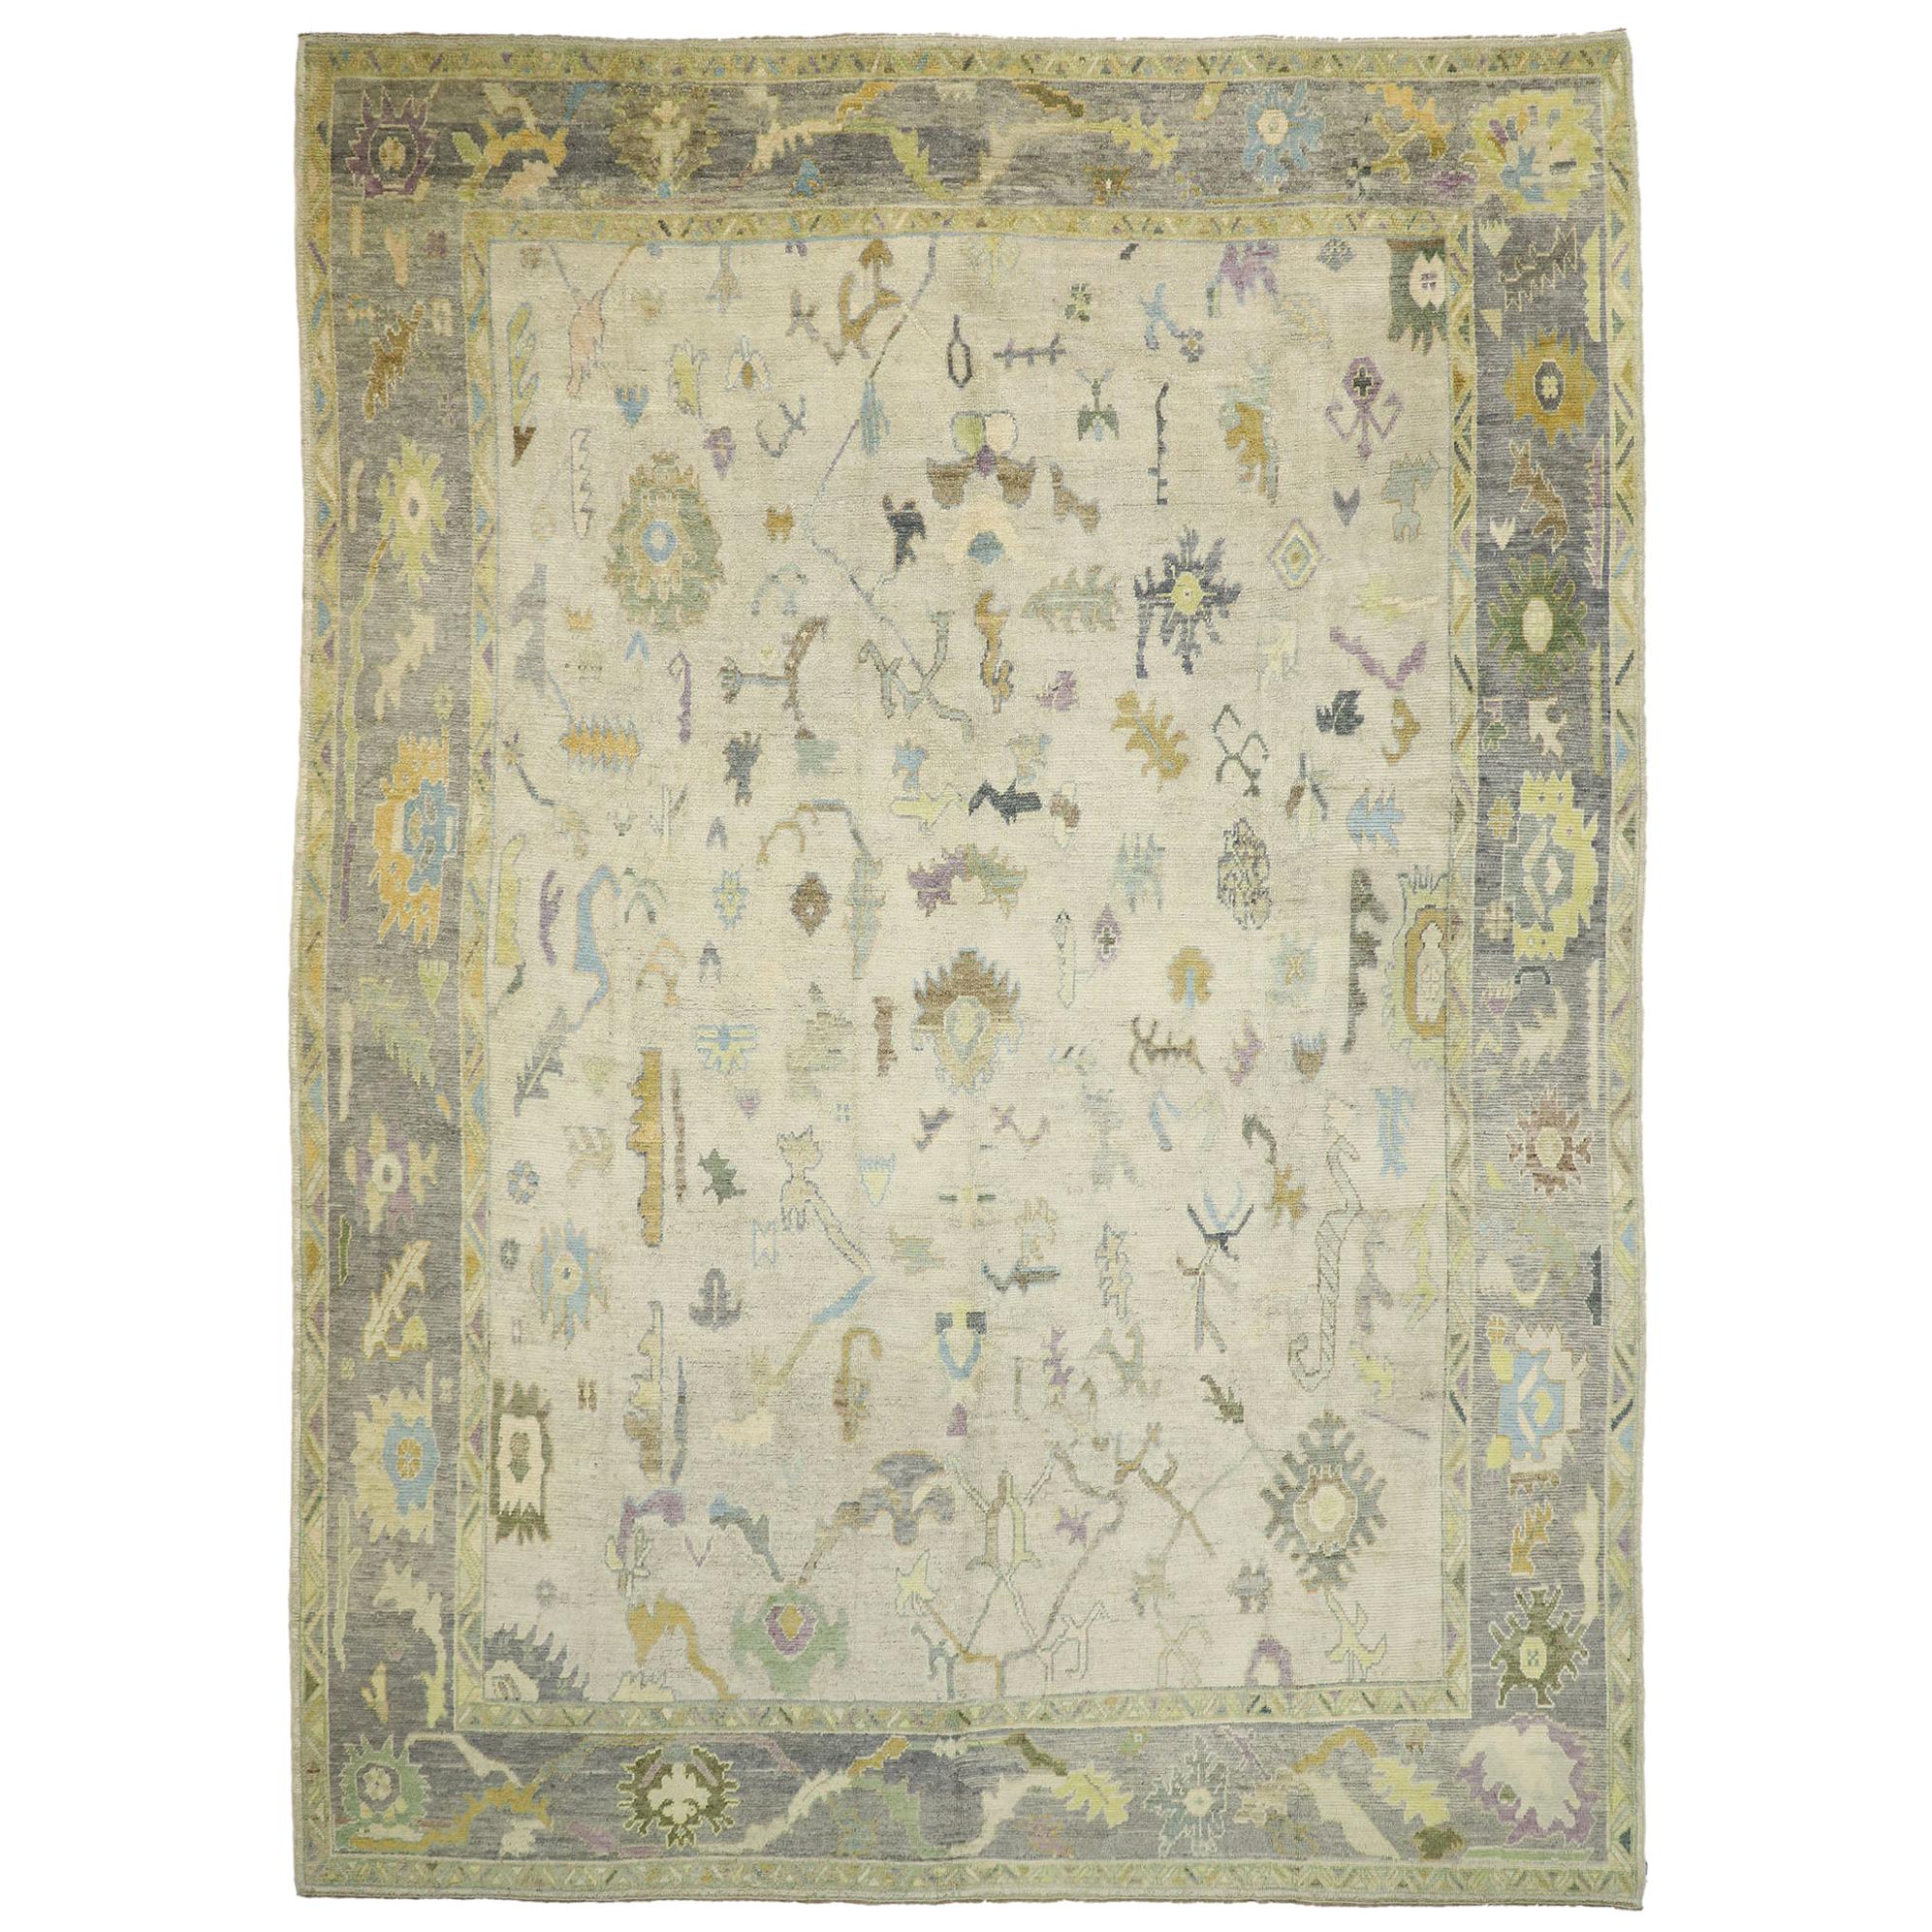 Contemporary Turkish Oushak Rug with Pastel Colors and French Transitional Style